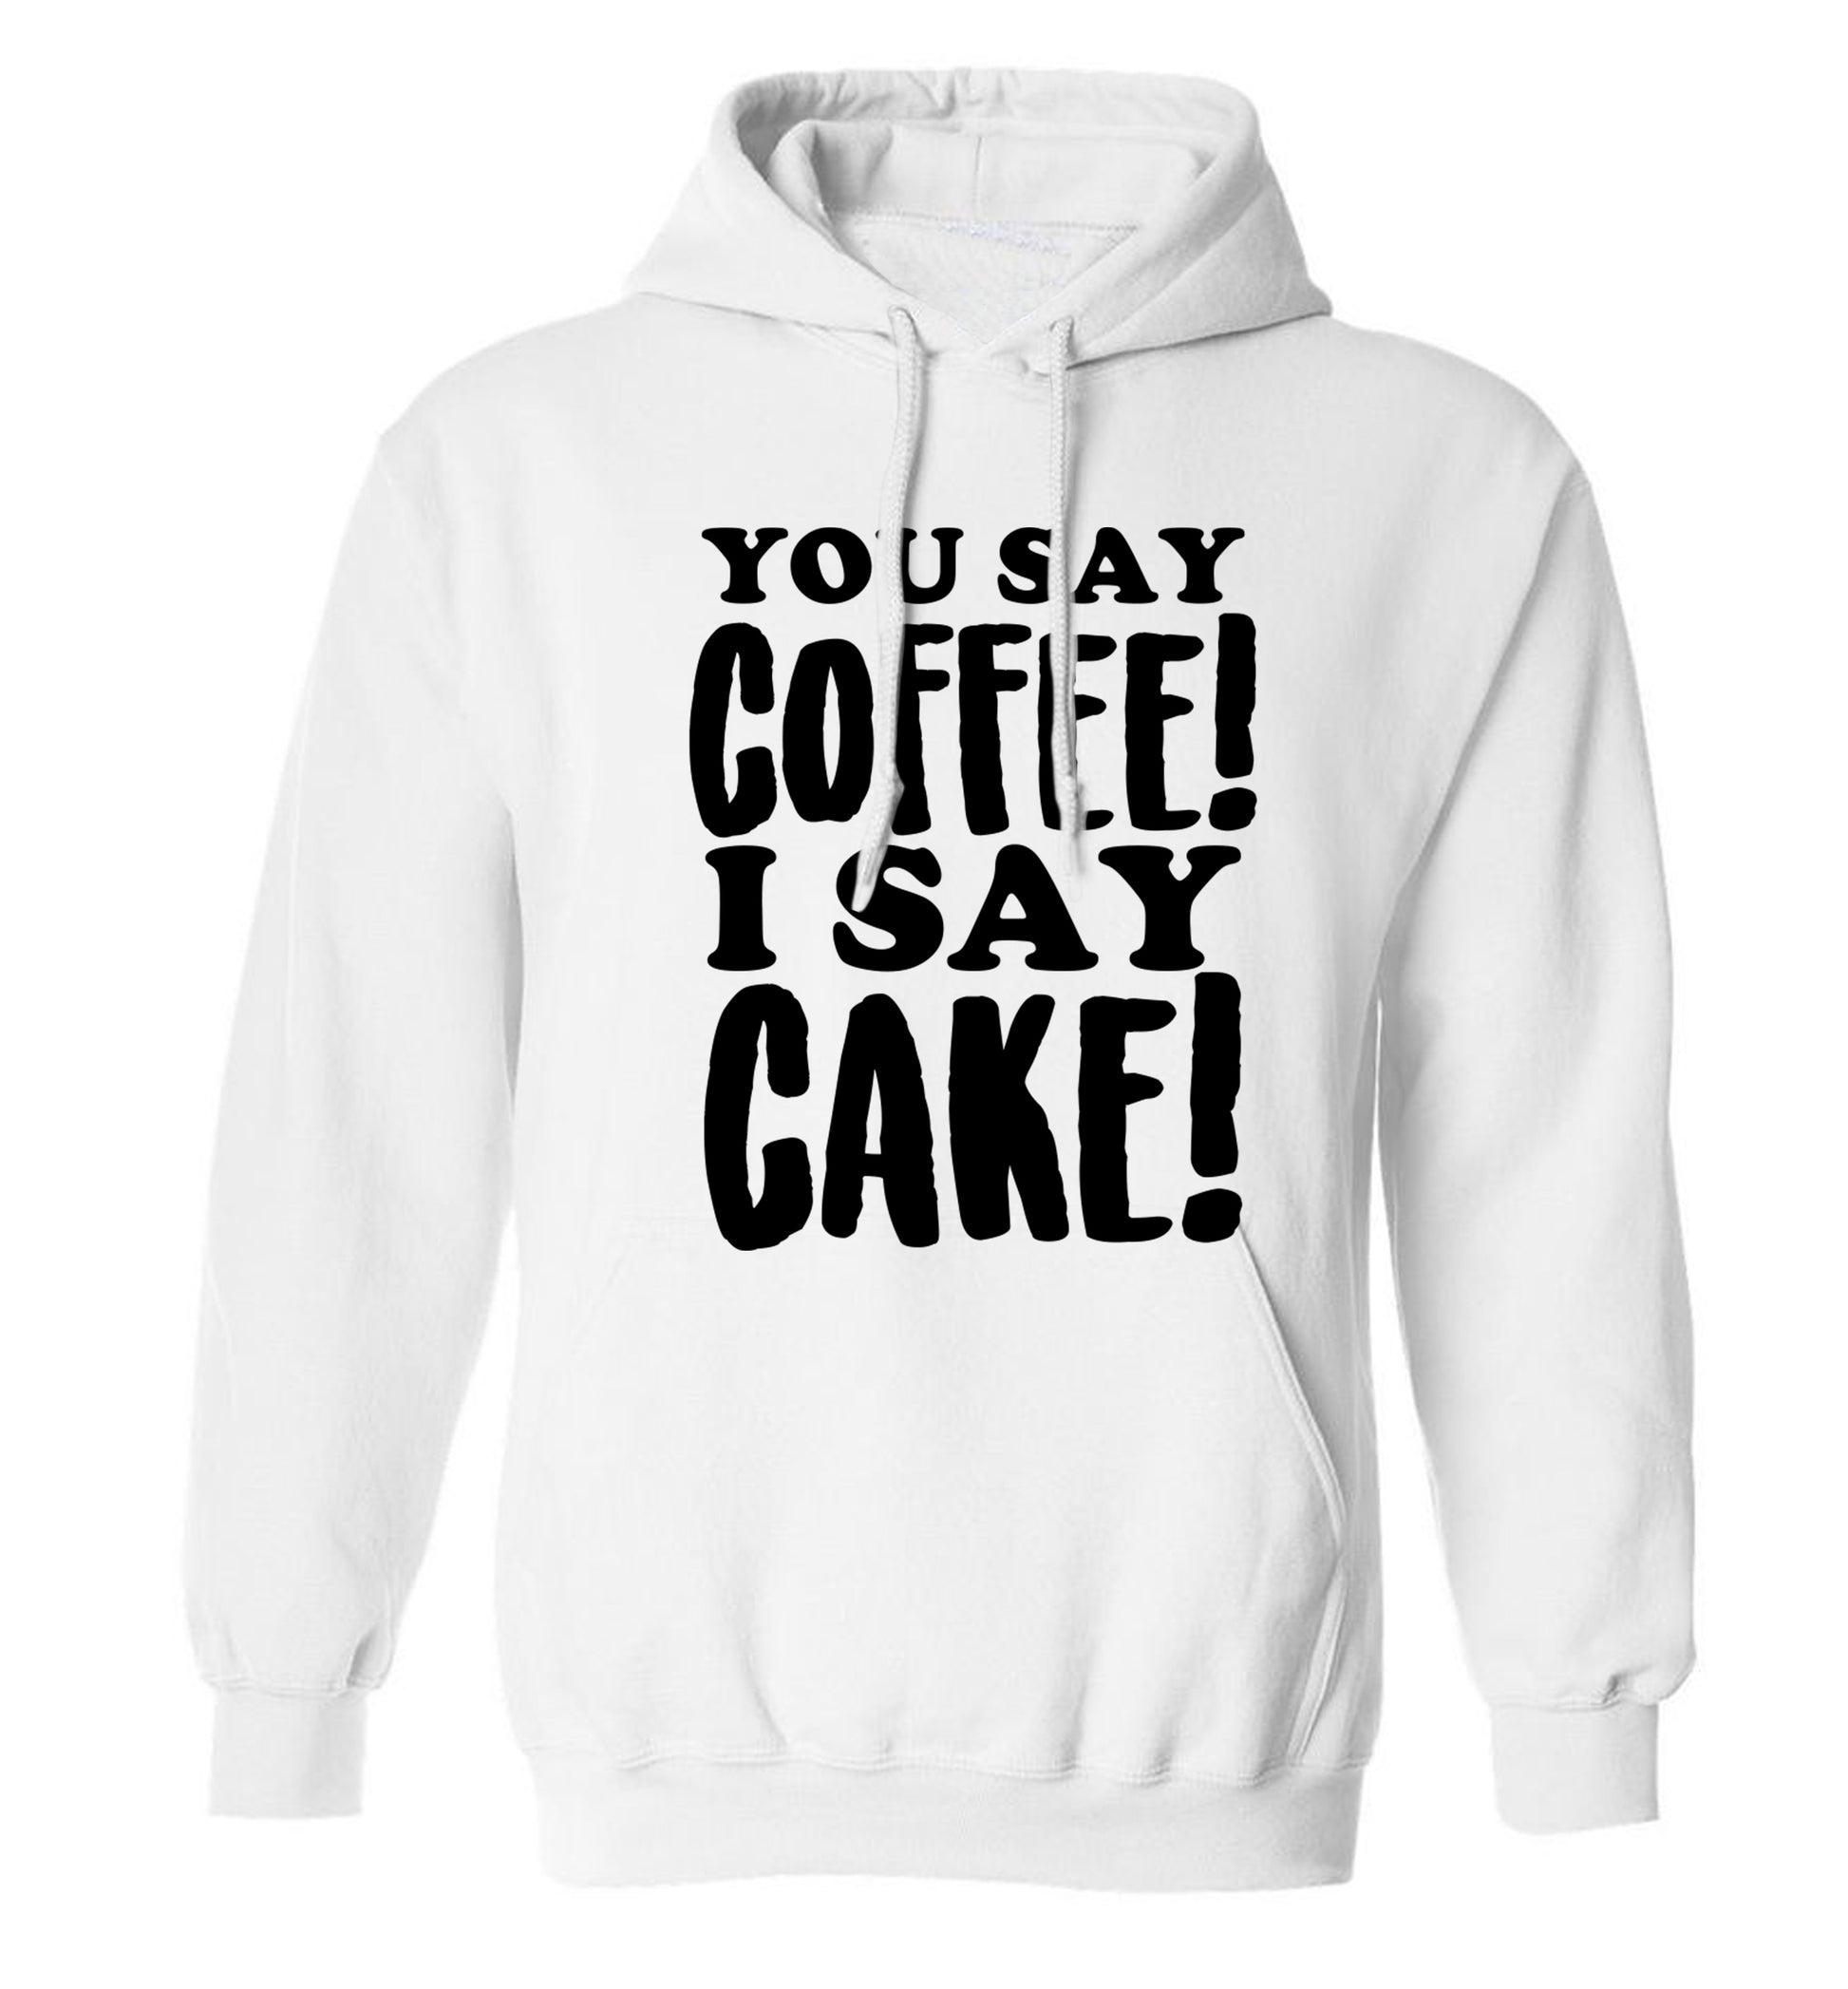 You say coffee I say cake! adults unisex white hoodie 2XL